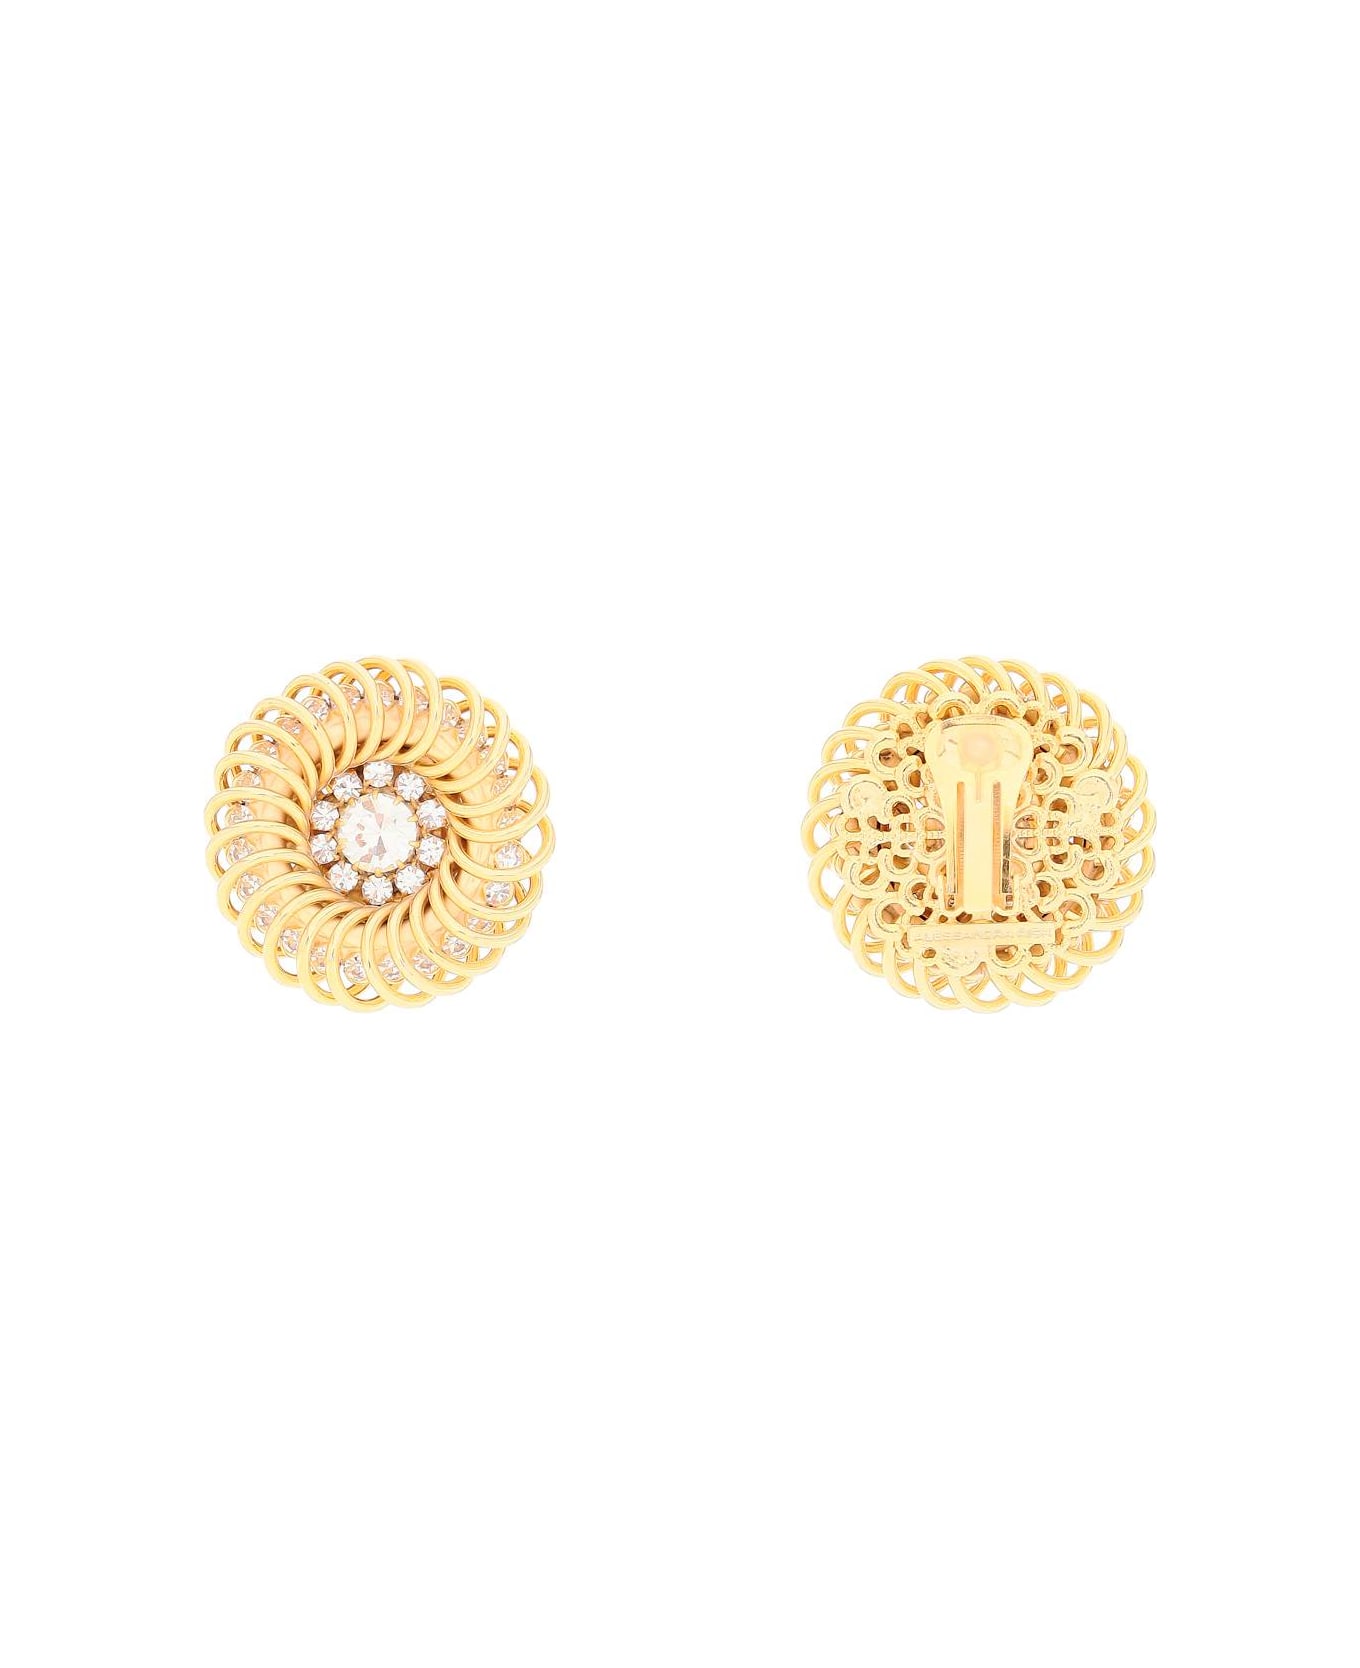 Alessandra Rich Spiral Earrings - CRY GOLD (Gold)